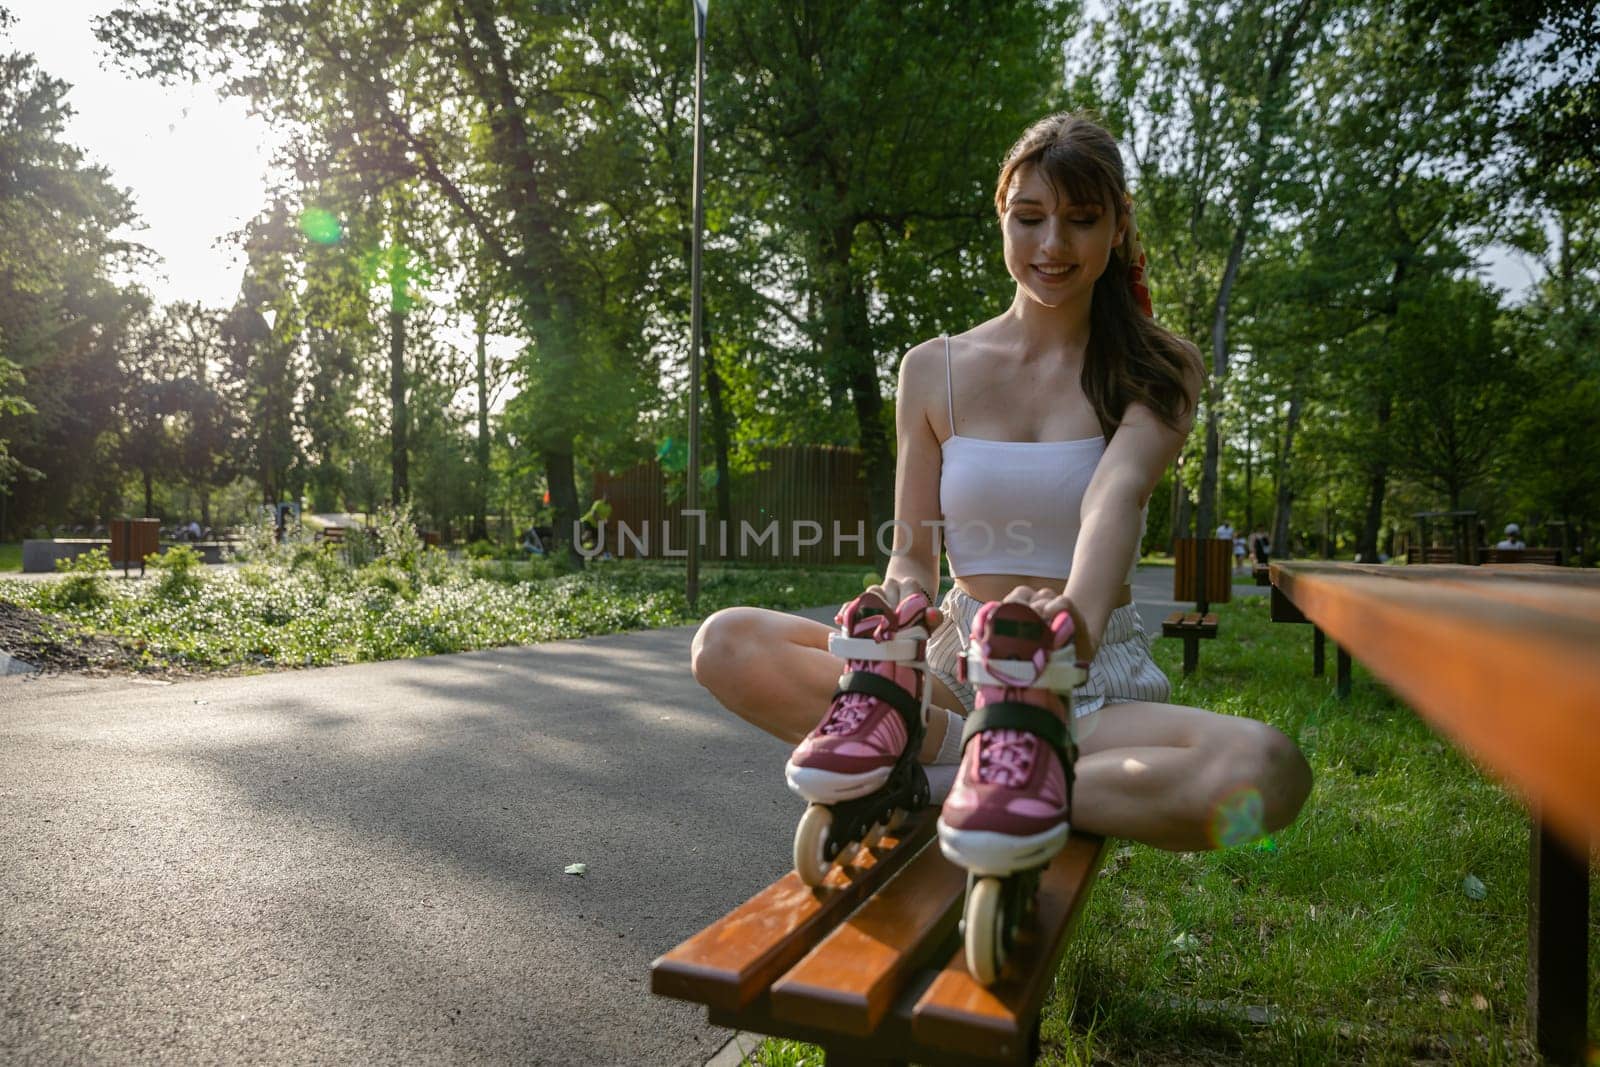 Spending time in the park on a sunny summer day. A girl is sitting on a brown bench with her legs crossed. She is holding a pair of rollerblades in front of her. Lots of trees and grass in the background.